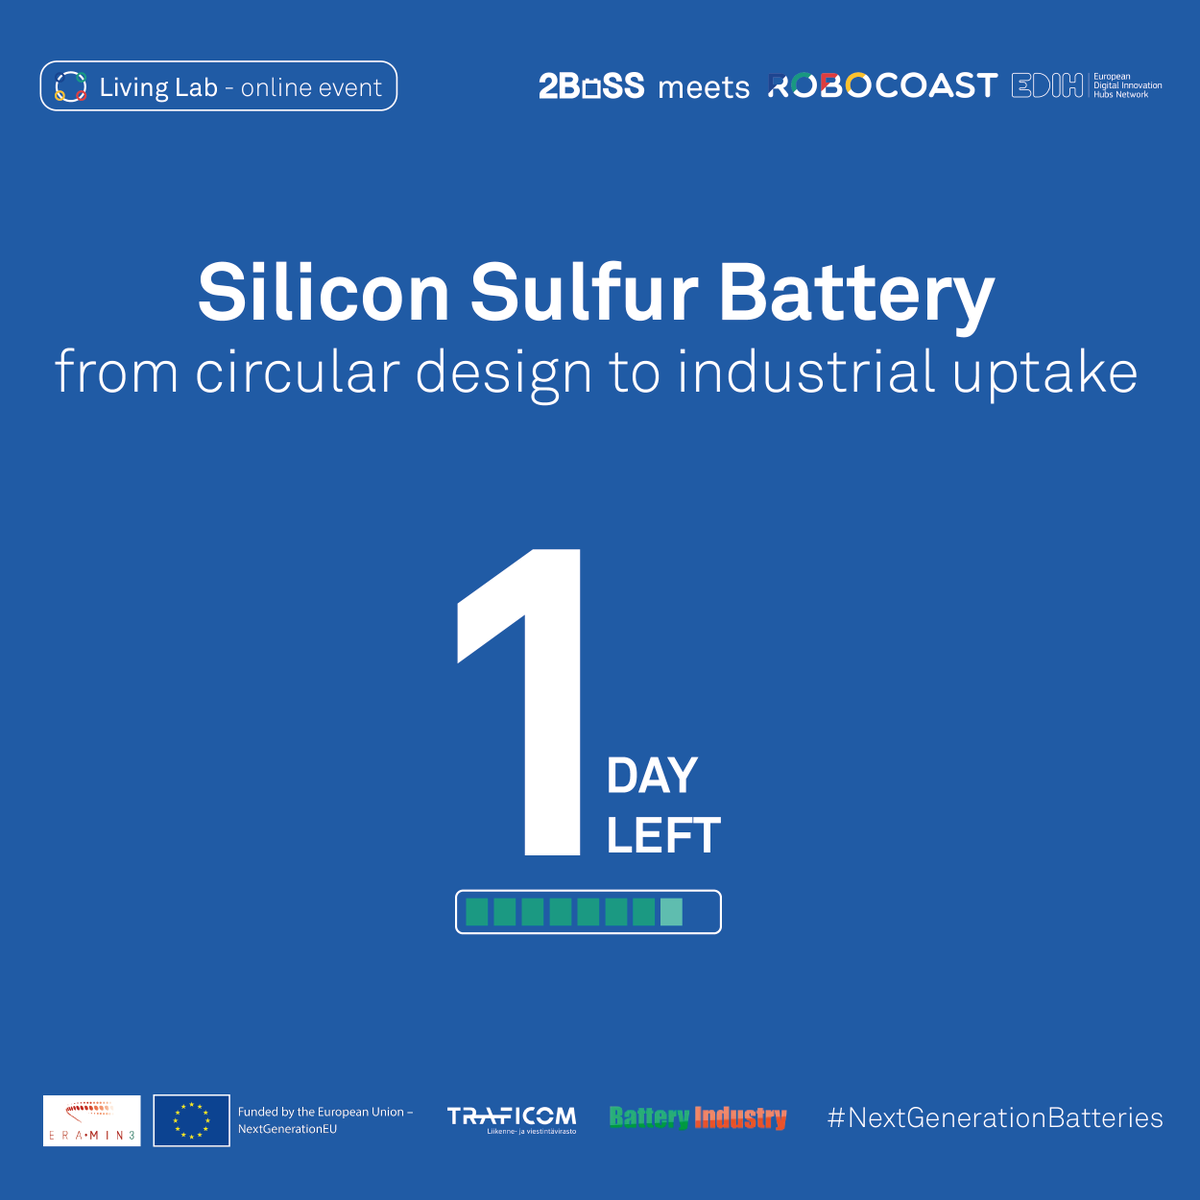 Just 1 day left until our highly anticipated event “Silicon Sulfur Battery: from #circular design to #industrial  uptake”🔋 Mark your calendars for tomorrow as we will kick off this exciting online event that you can join from anywhere in the world! 🌍 #SSB23 #Sustainability